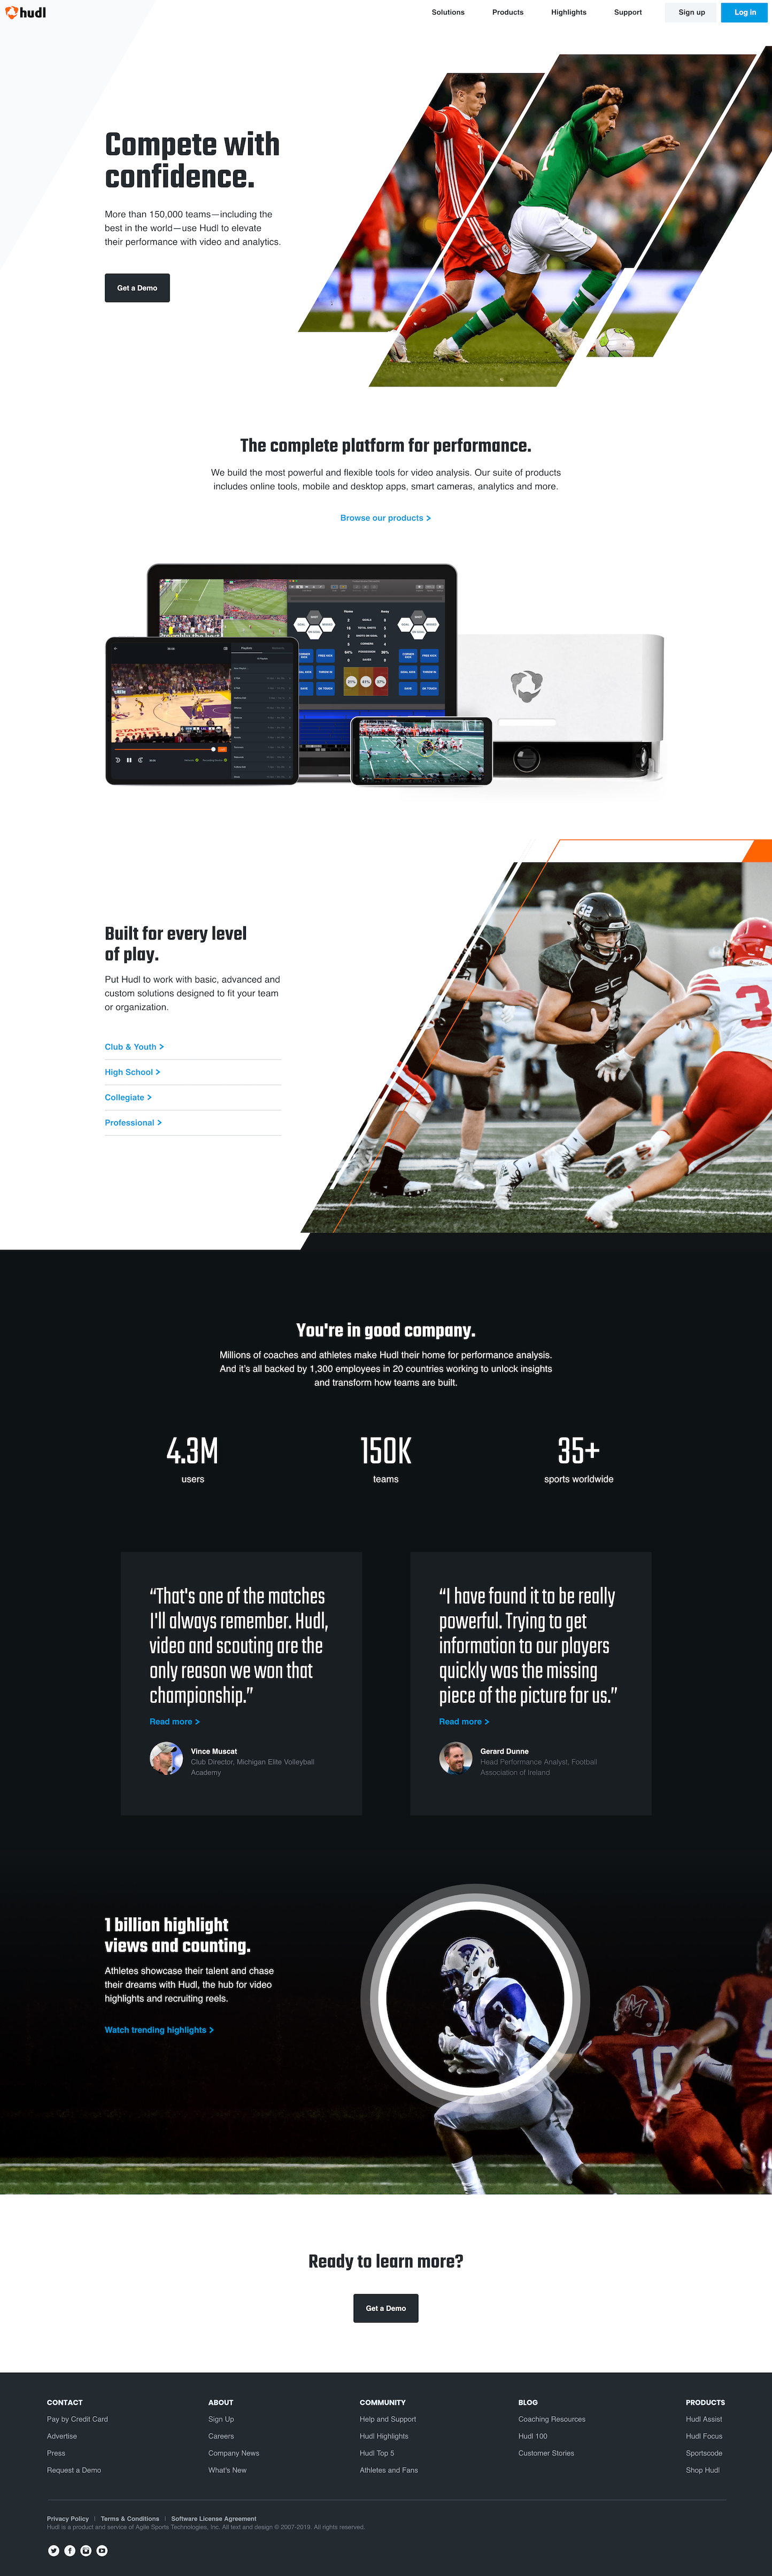 Screenshot of the Home page from the Hudl website.